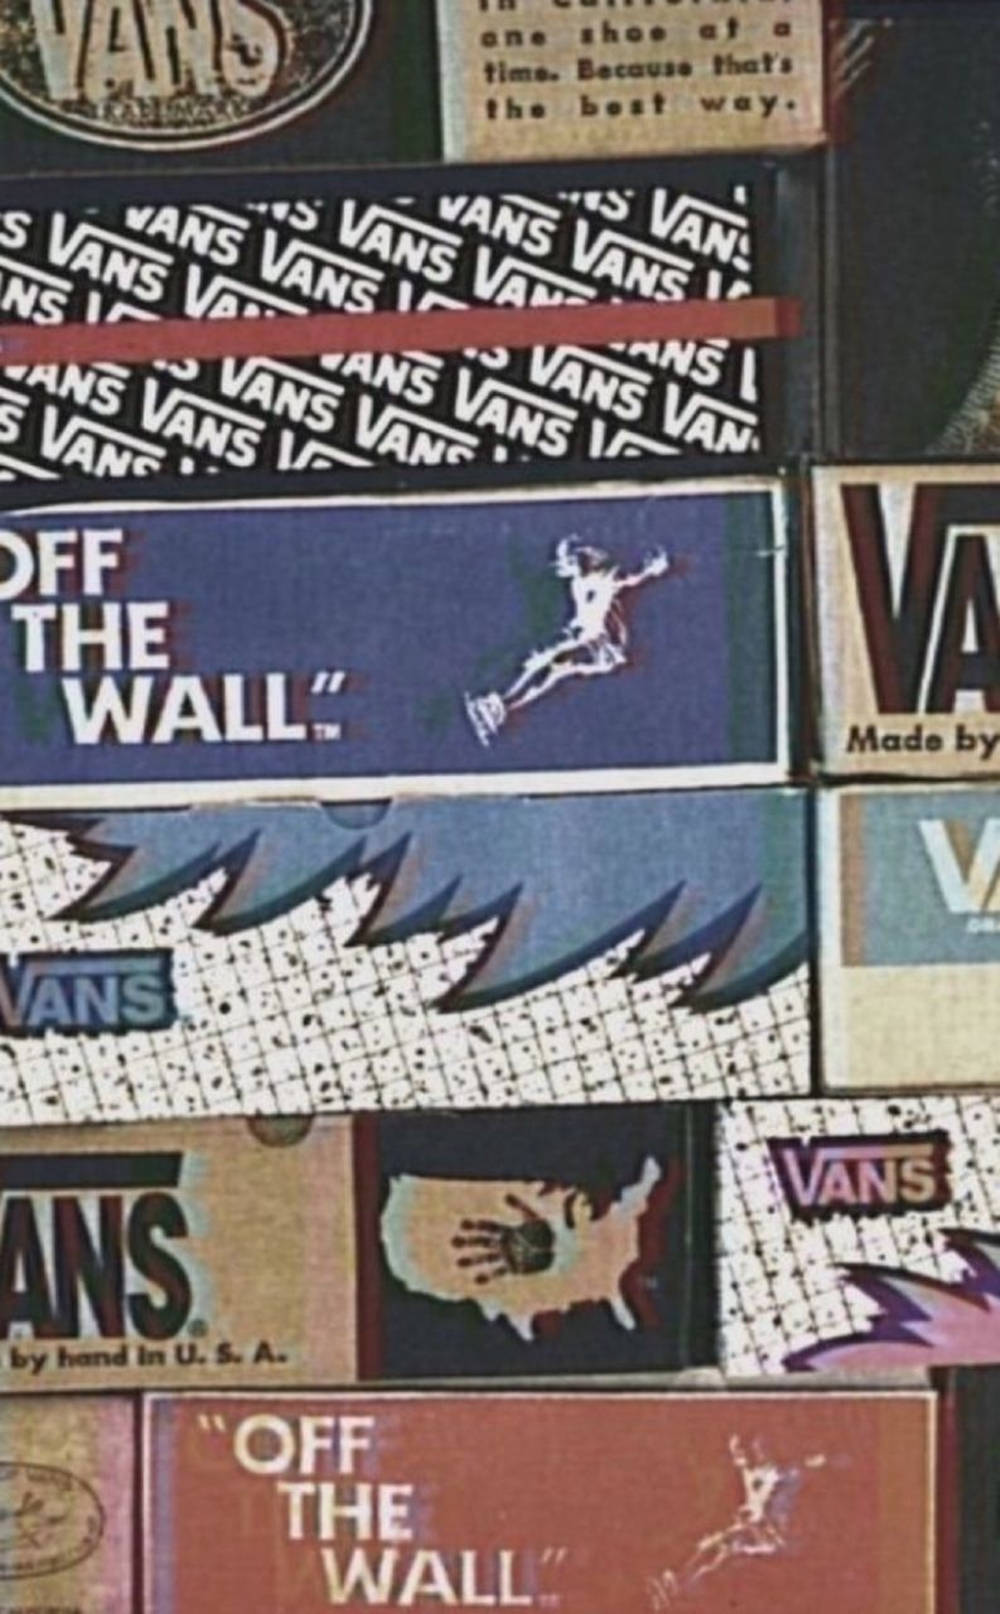 A collection of Vans shoes and logos - Vans